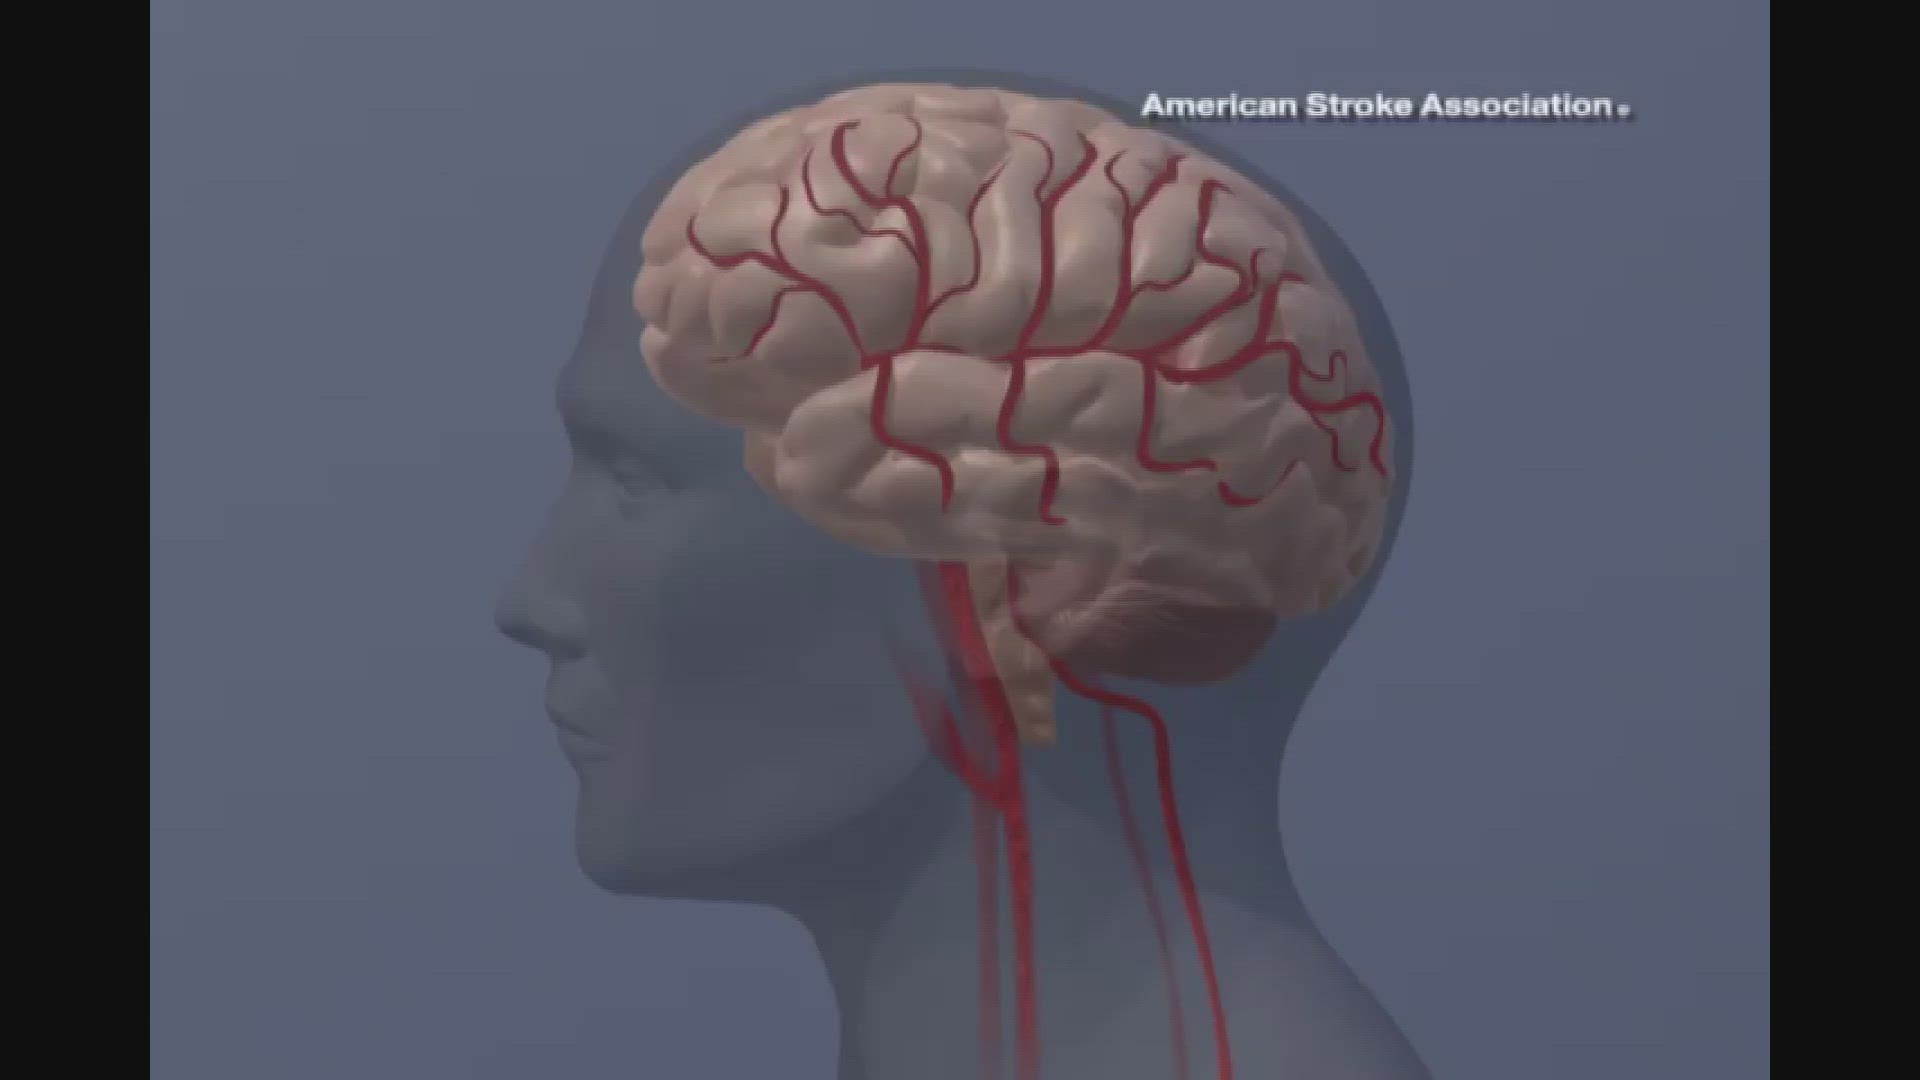 Nearly 800,000 cases of stroke happen every year in the United States.